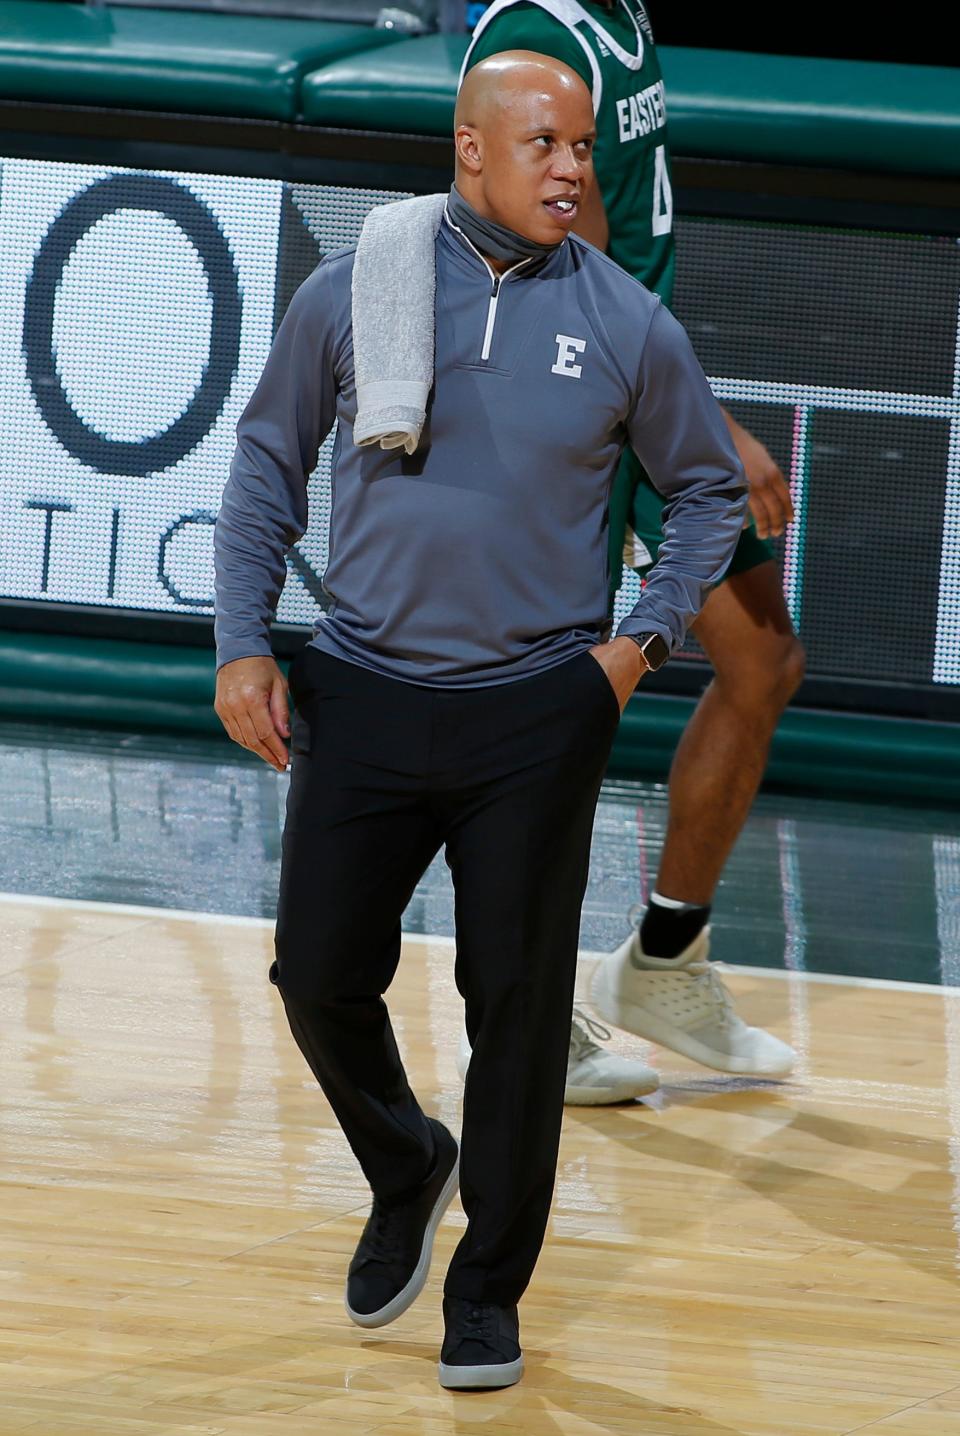 Eastern Michigan coach Rob Murphy stands on the court during the first half against Michigan State, Wednesday, Nov. 25, 2020, in East Lansing.